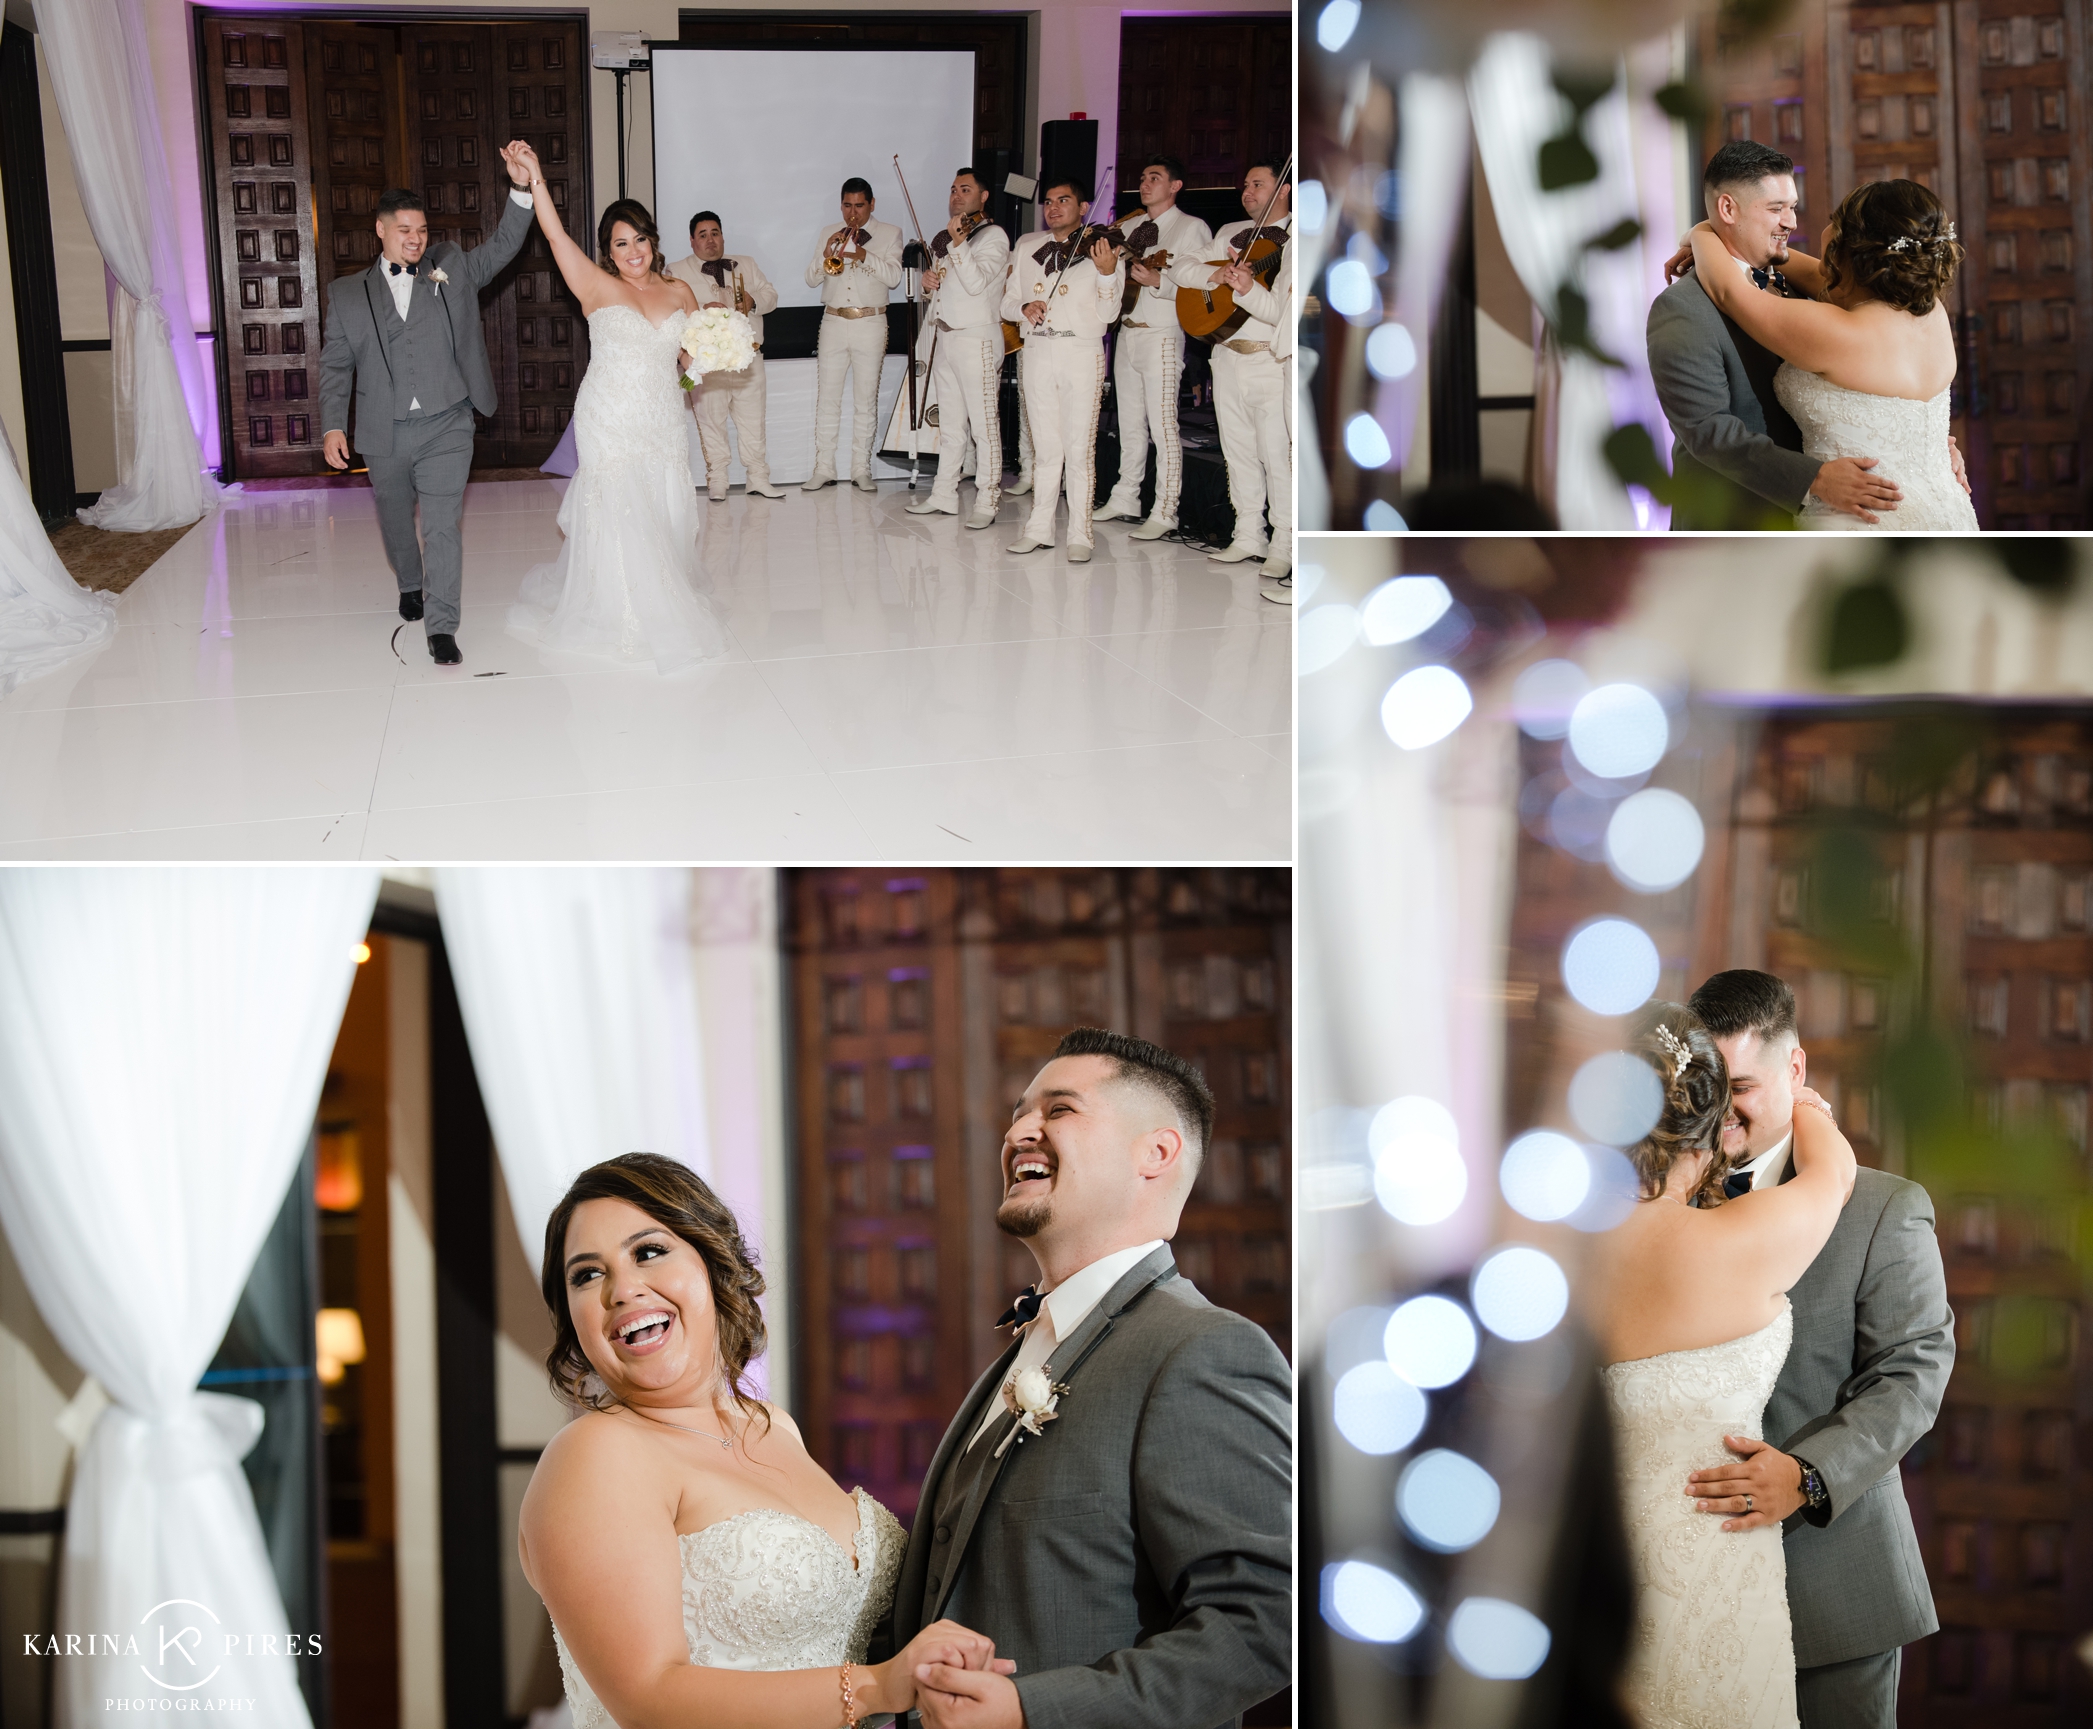 Navy and blush Los Angeles Wedding by Karina Pires Photography